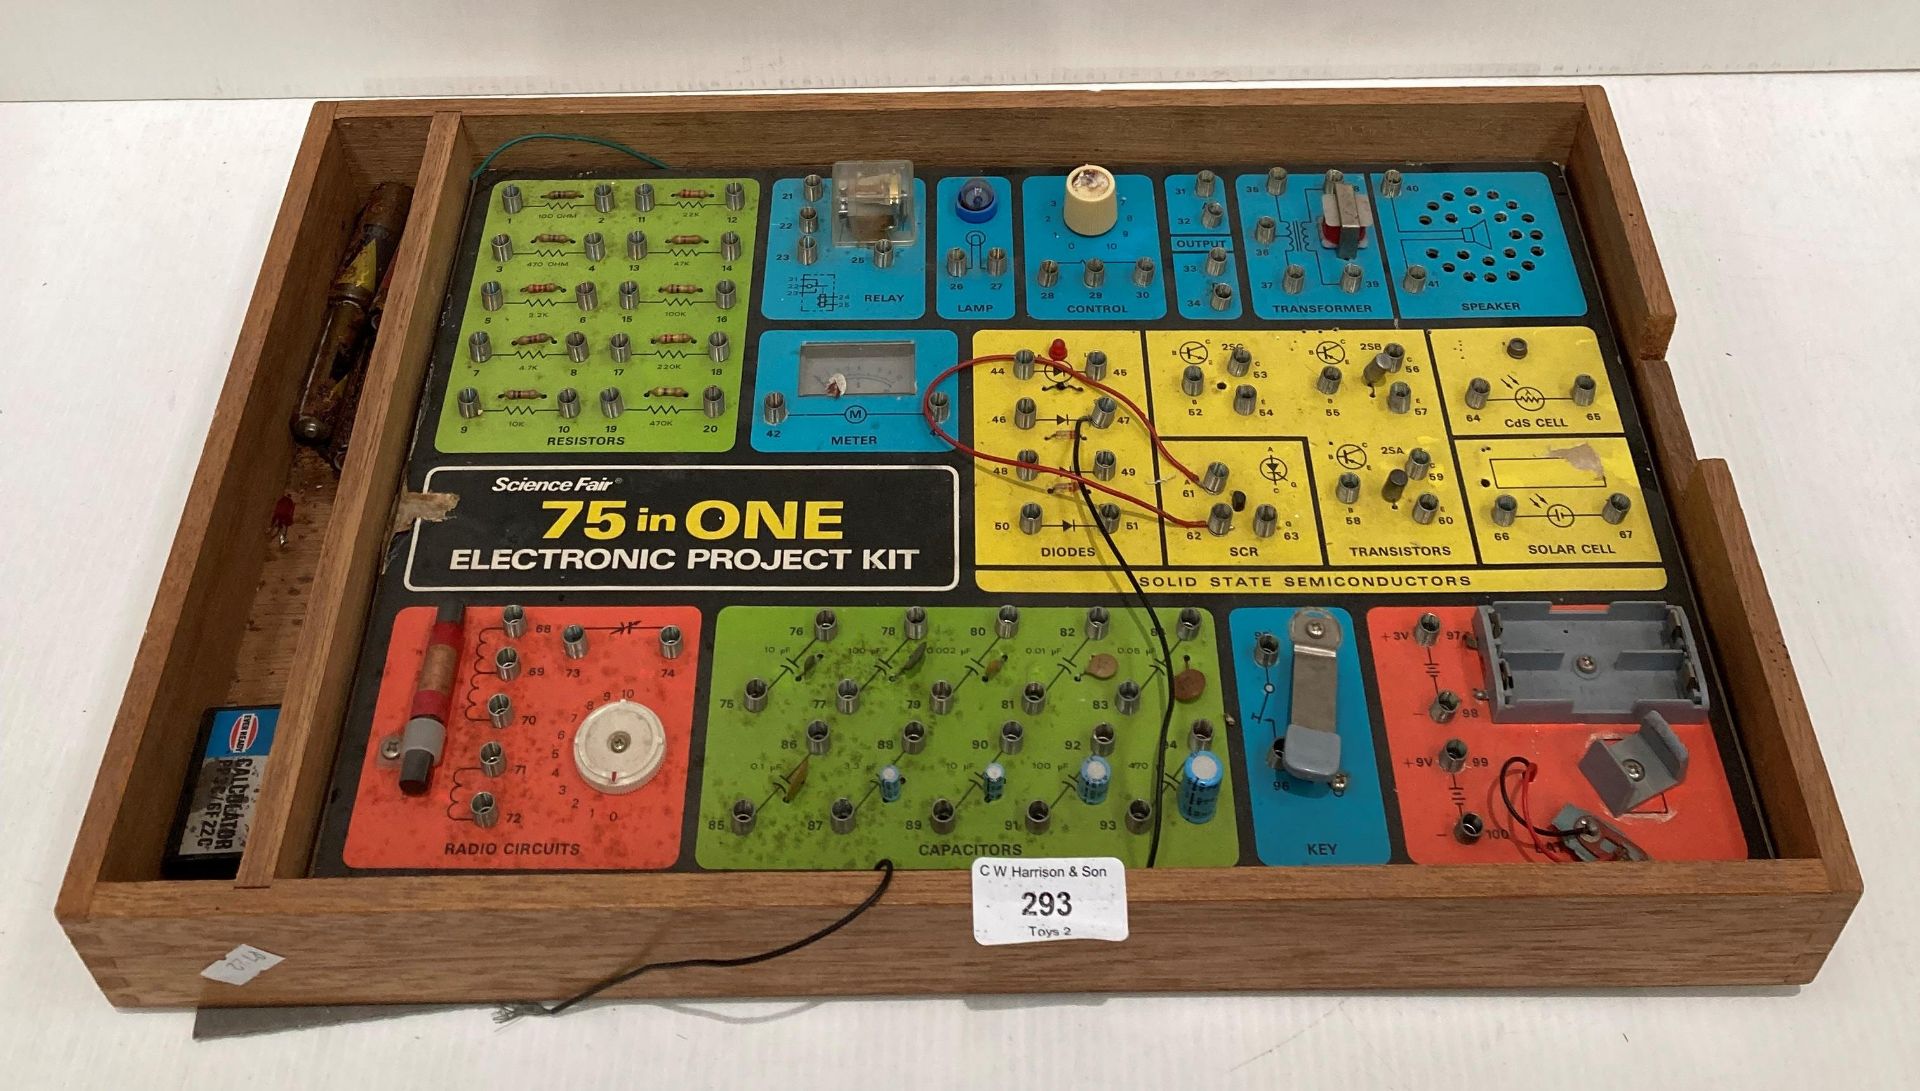 Science Fair 75 in one electronic project kit (S1 T2)